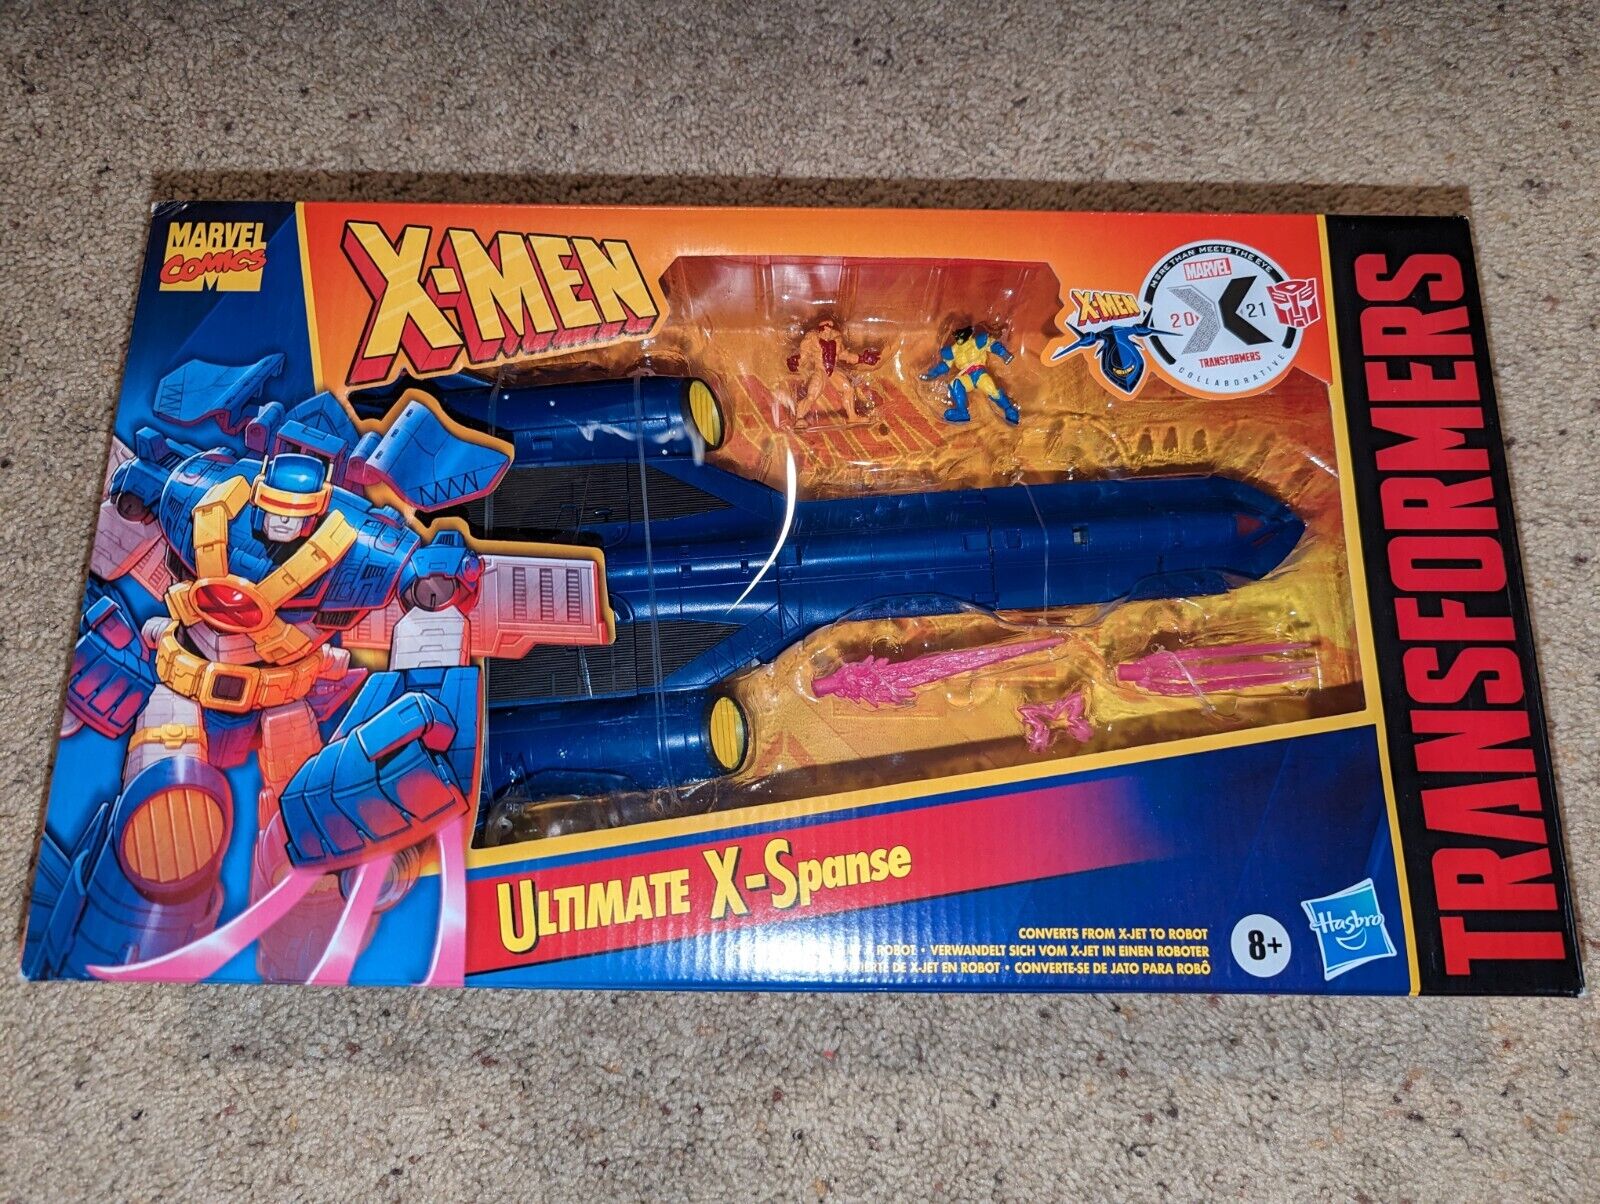 Transformers X-Men Cartoon Crossover Xspanse Figure Unopened Damaged Boxed New